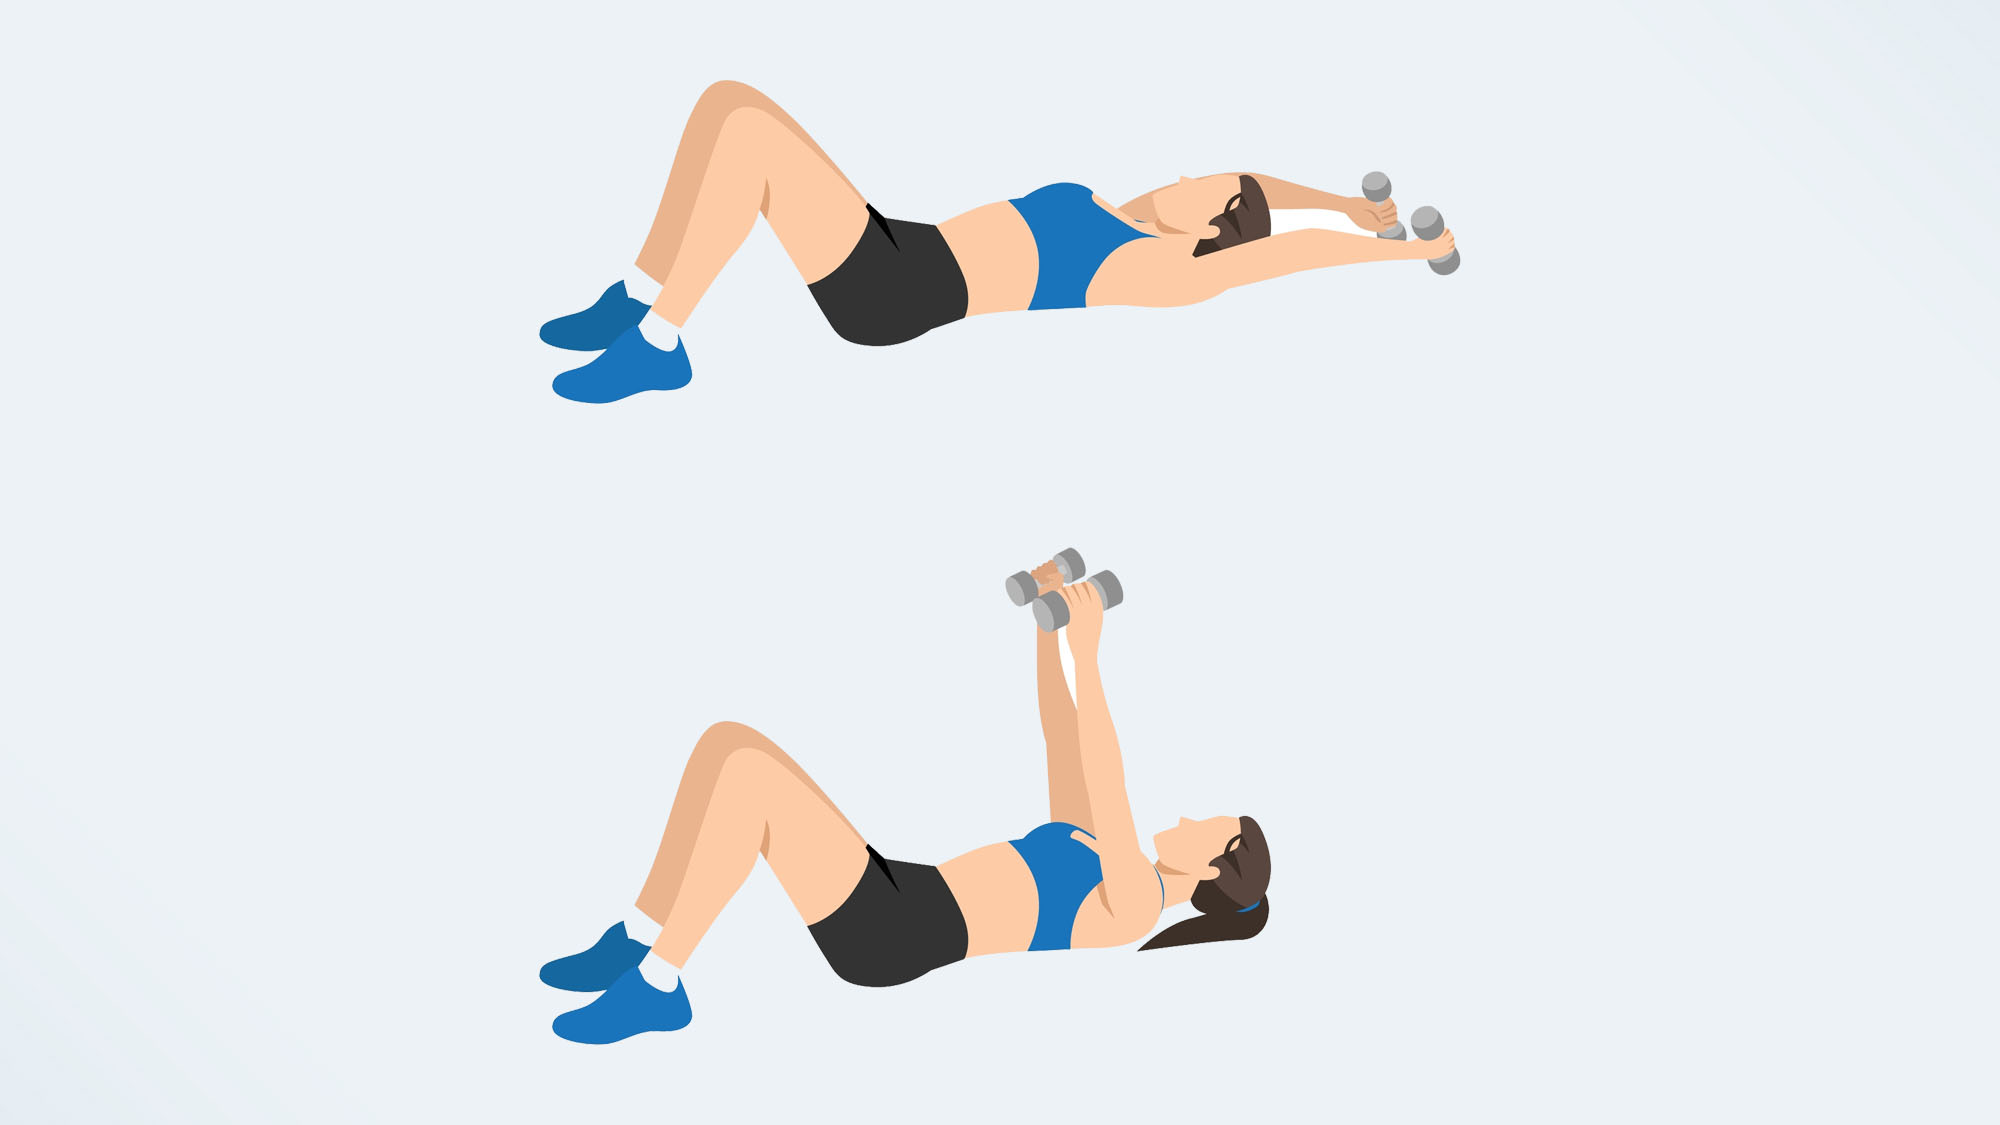 Elo of a woman doing dumbbell pulls